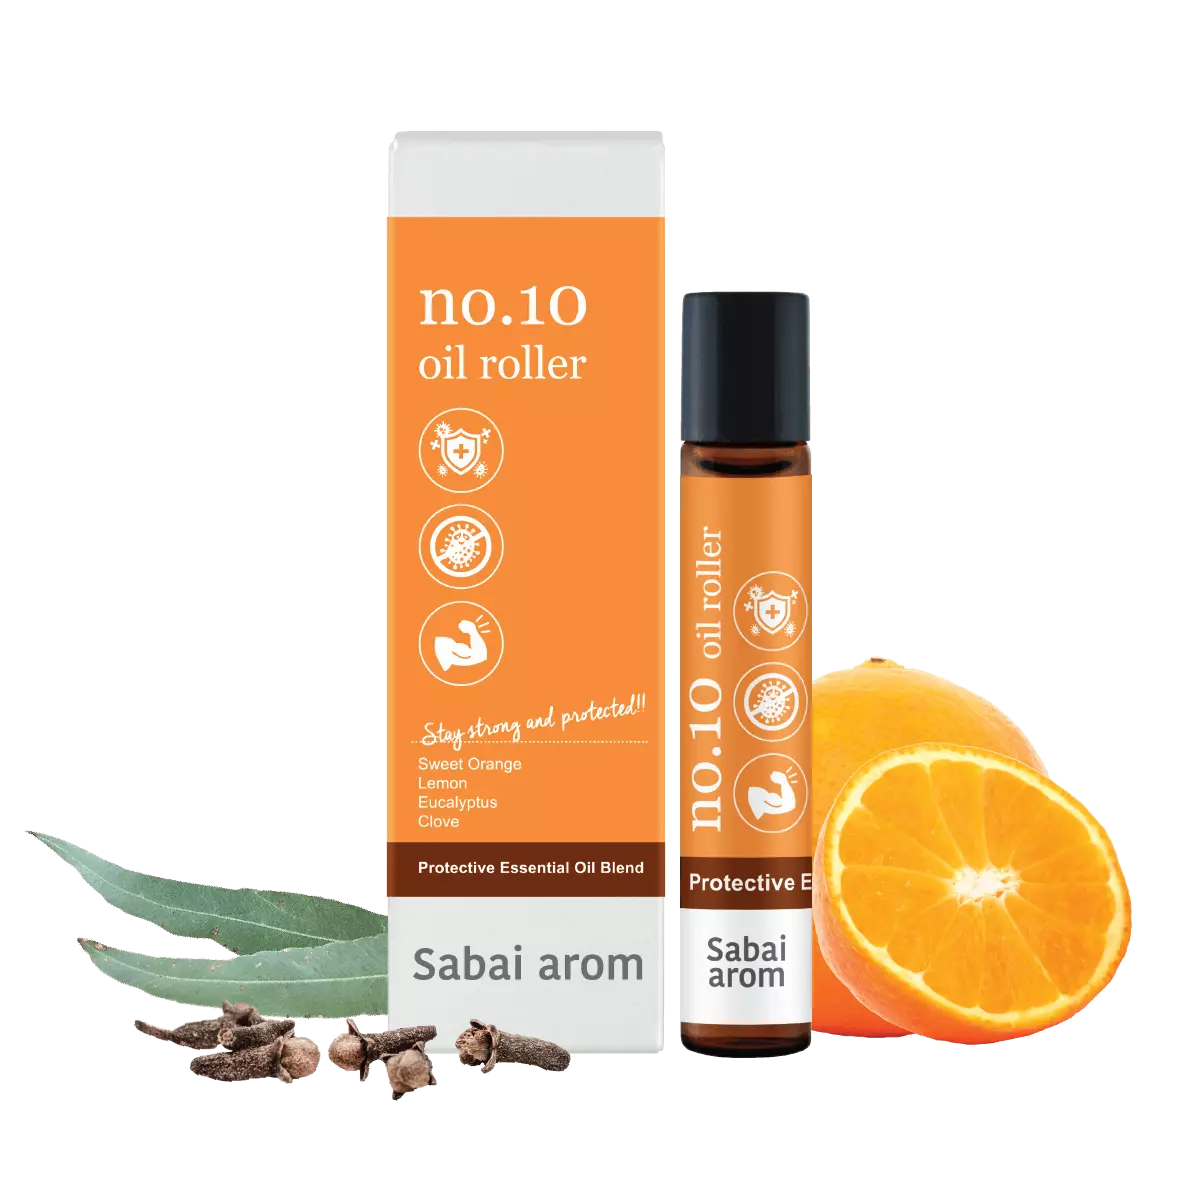 oil roller no10 <h2>NO.10 On Guard support your immunity while traveling.</h2> No. 10 Oil Roller is a super blend to pop in your pocket, little pocket or close at hand just when you need a shield that protects you from those environmental threats and support your immunity while traveling. It contains the soul essences distilled from Sweet Orange, Lemon, Eucalyptus and Clove in a conveniently carry-away sizing. <strong>Scent</strong> : The contrastive combination of warming aroma of clove kisses the euphoric indentity of orange that somehow creates a perfect couple from differnt trait, making you feel warm at heart and safe in your own strenght.